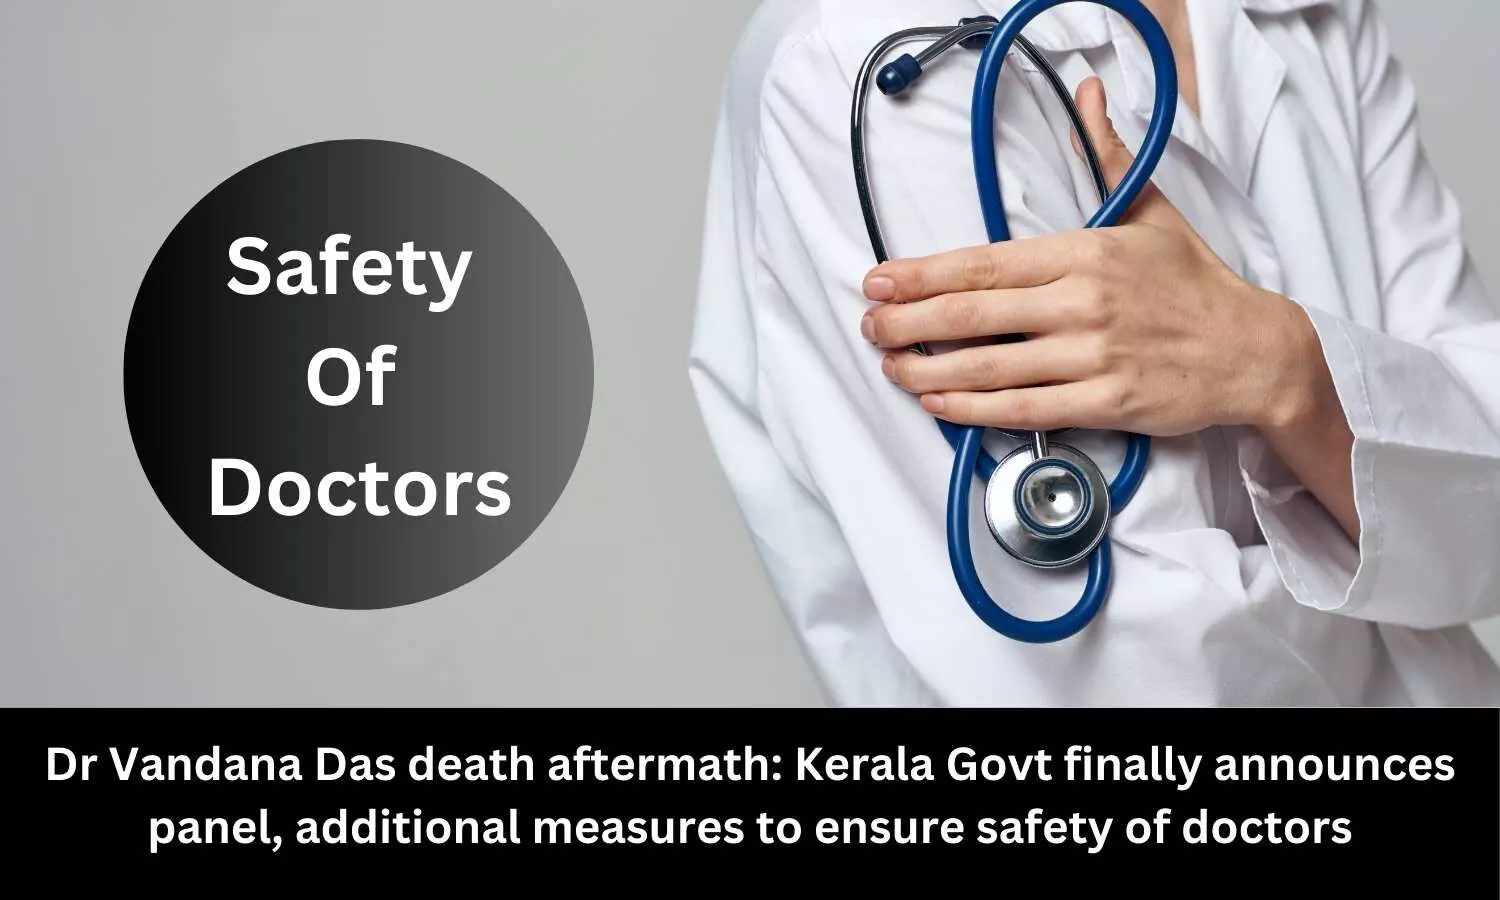 Dr Vandana Das death aftermath: Kerala Govt finally announces panel, additional measures to ensure safety of doctors